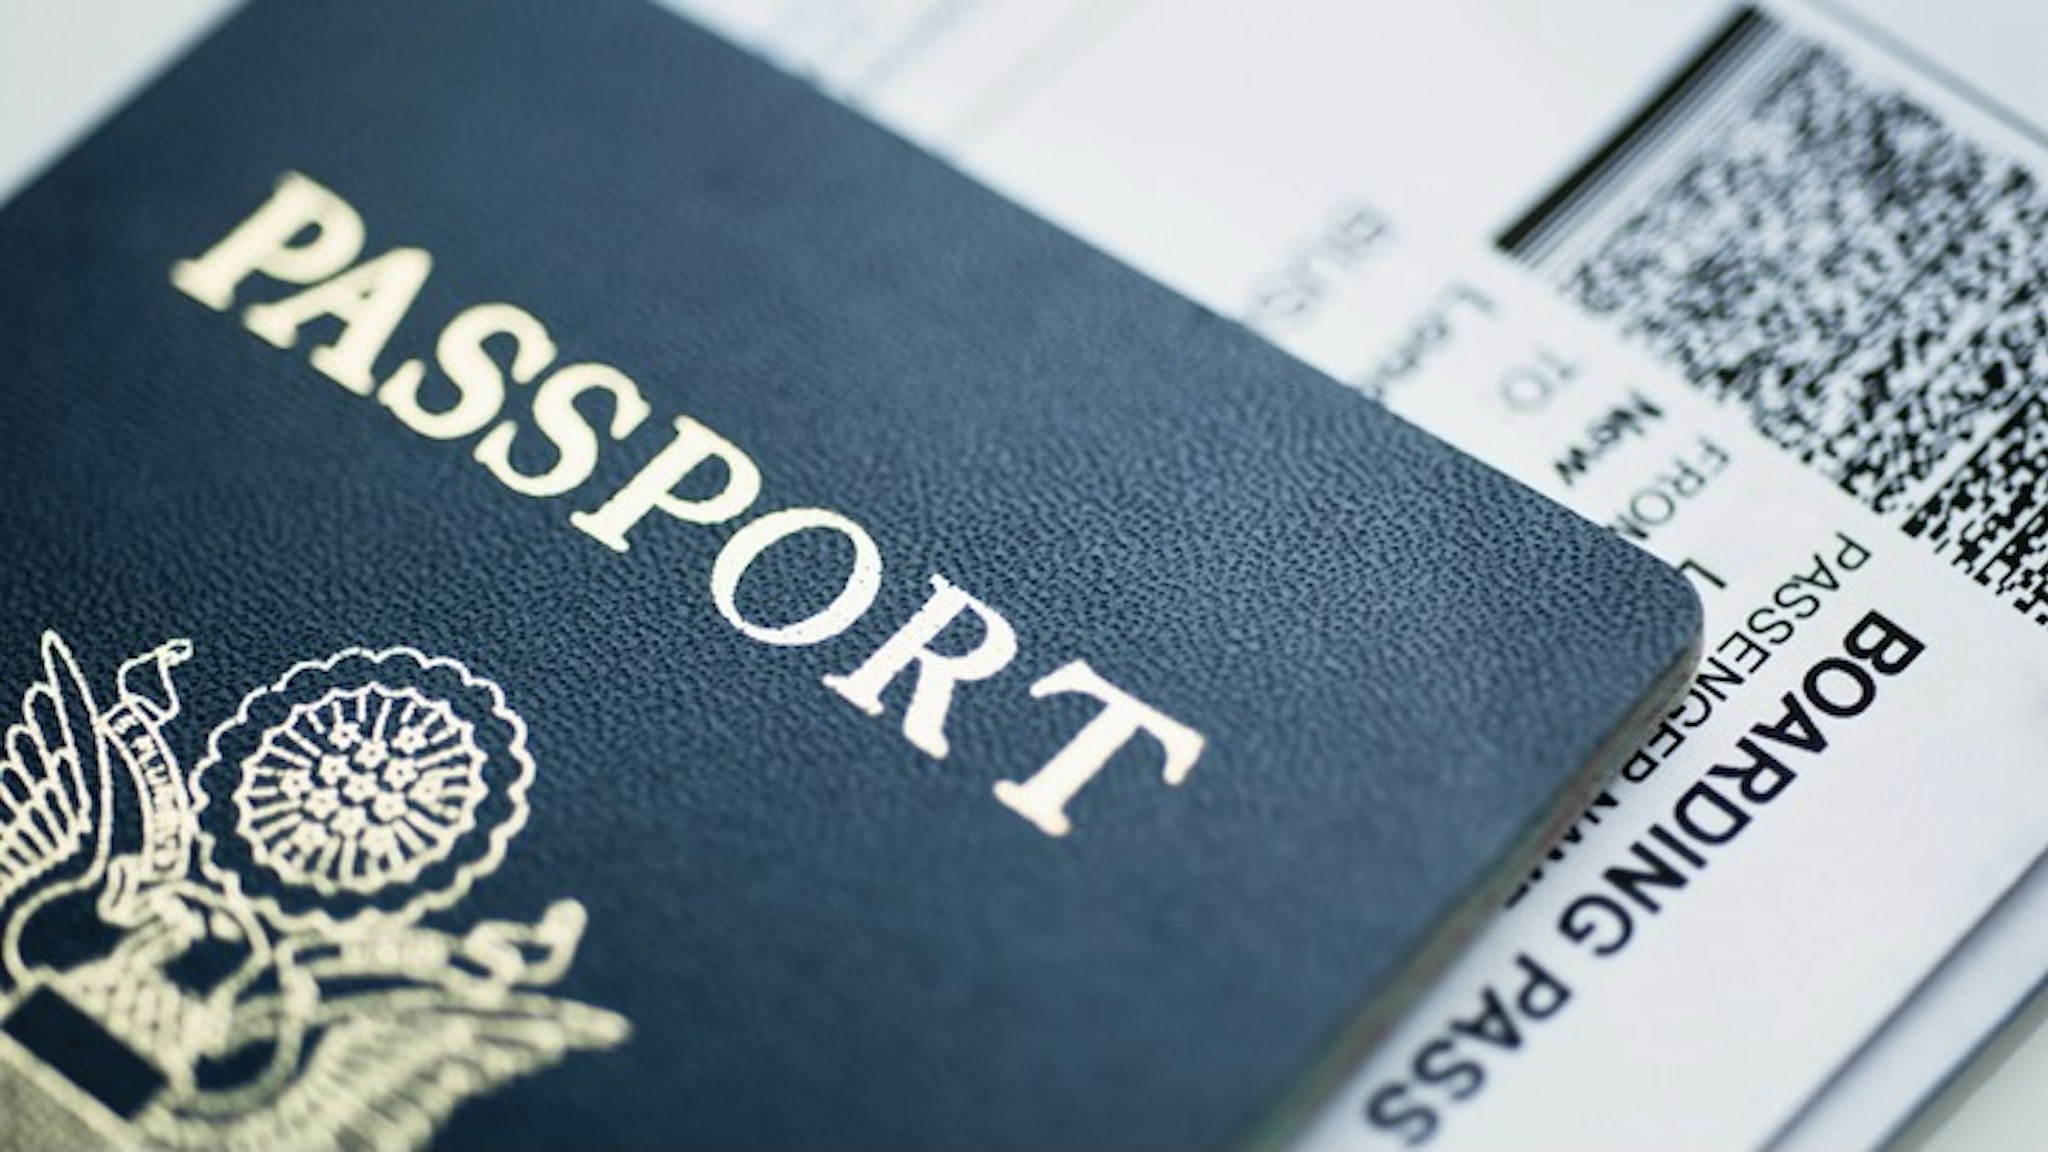 American passport with boarding pass inside - stock photo Tetra Images via Getty Images